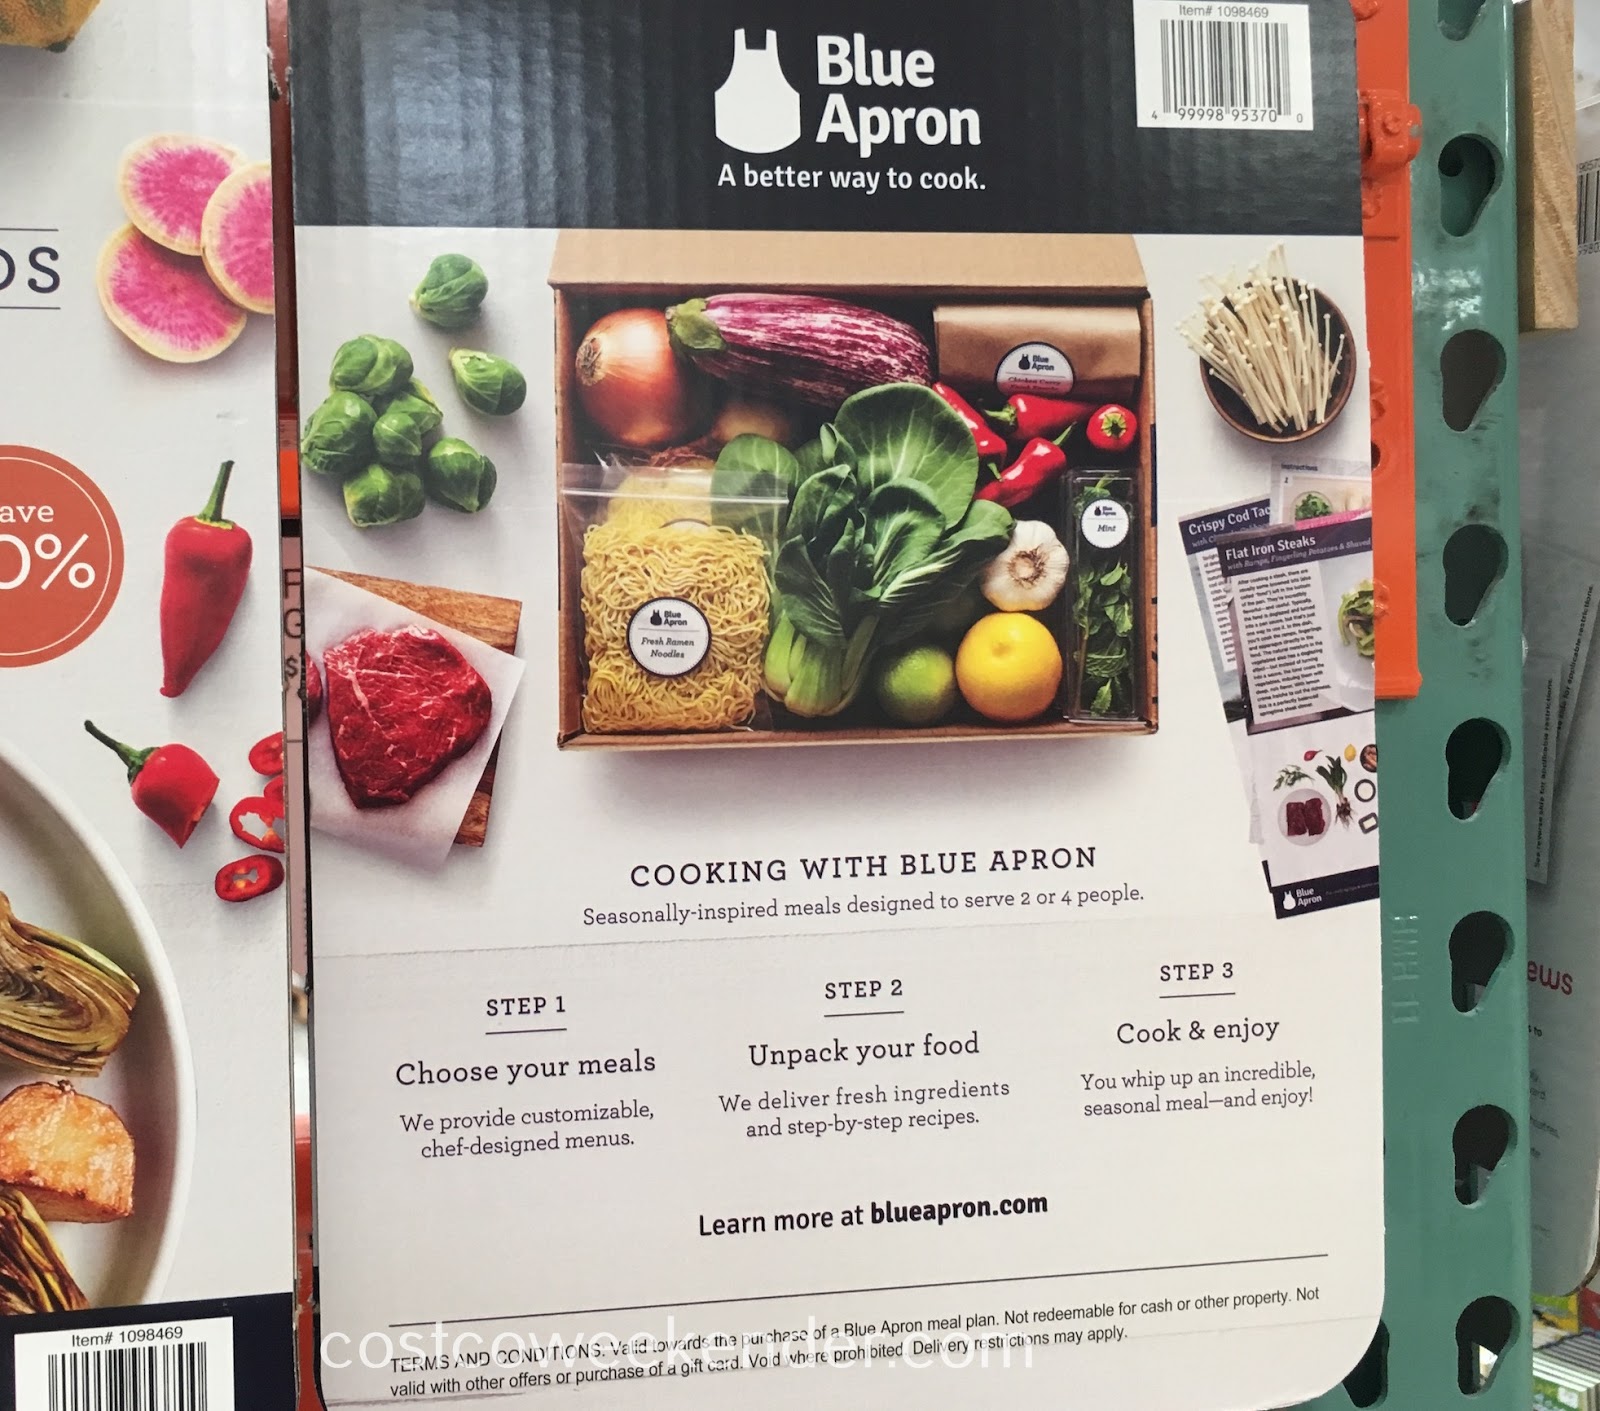 Costco: Purchase $ Blue Apron Gift Card for $